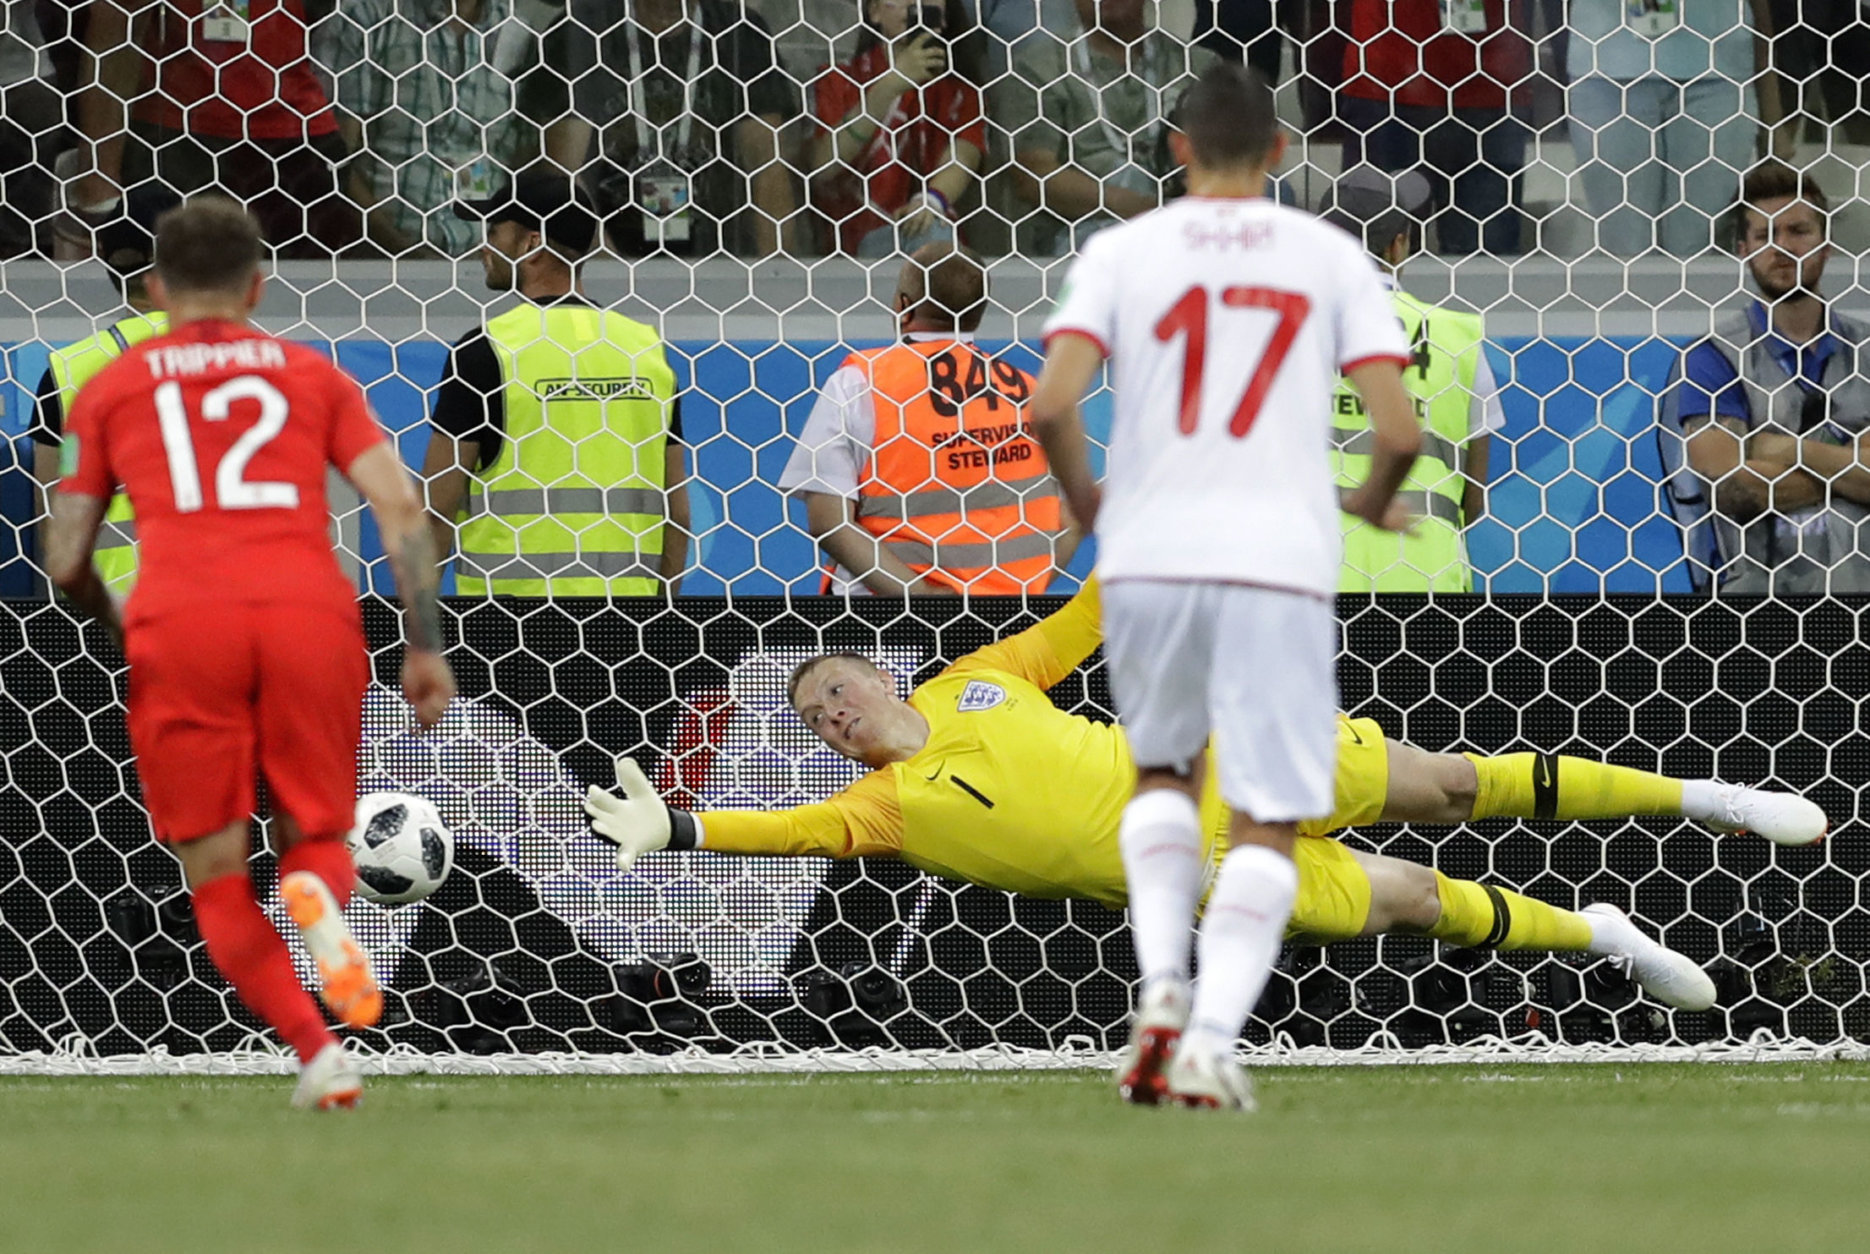 England goalkeeper Jordan Pickford, misses the ball during the group G match between Tunisia and England at the 2018 soccer World Cup in the Volgograd Arena in Volgograd, Russia, Monday, June 18, 2018. (AP Photo/Sergei Grits)